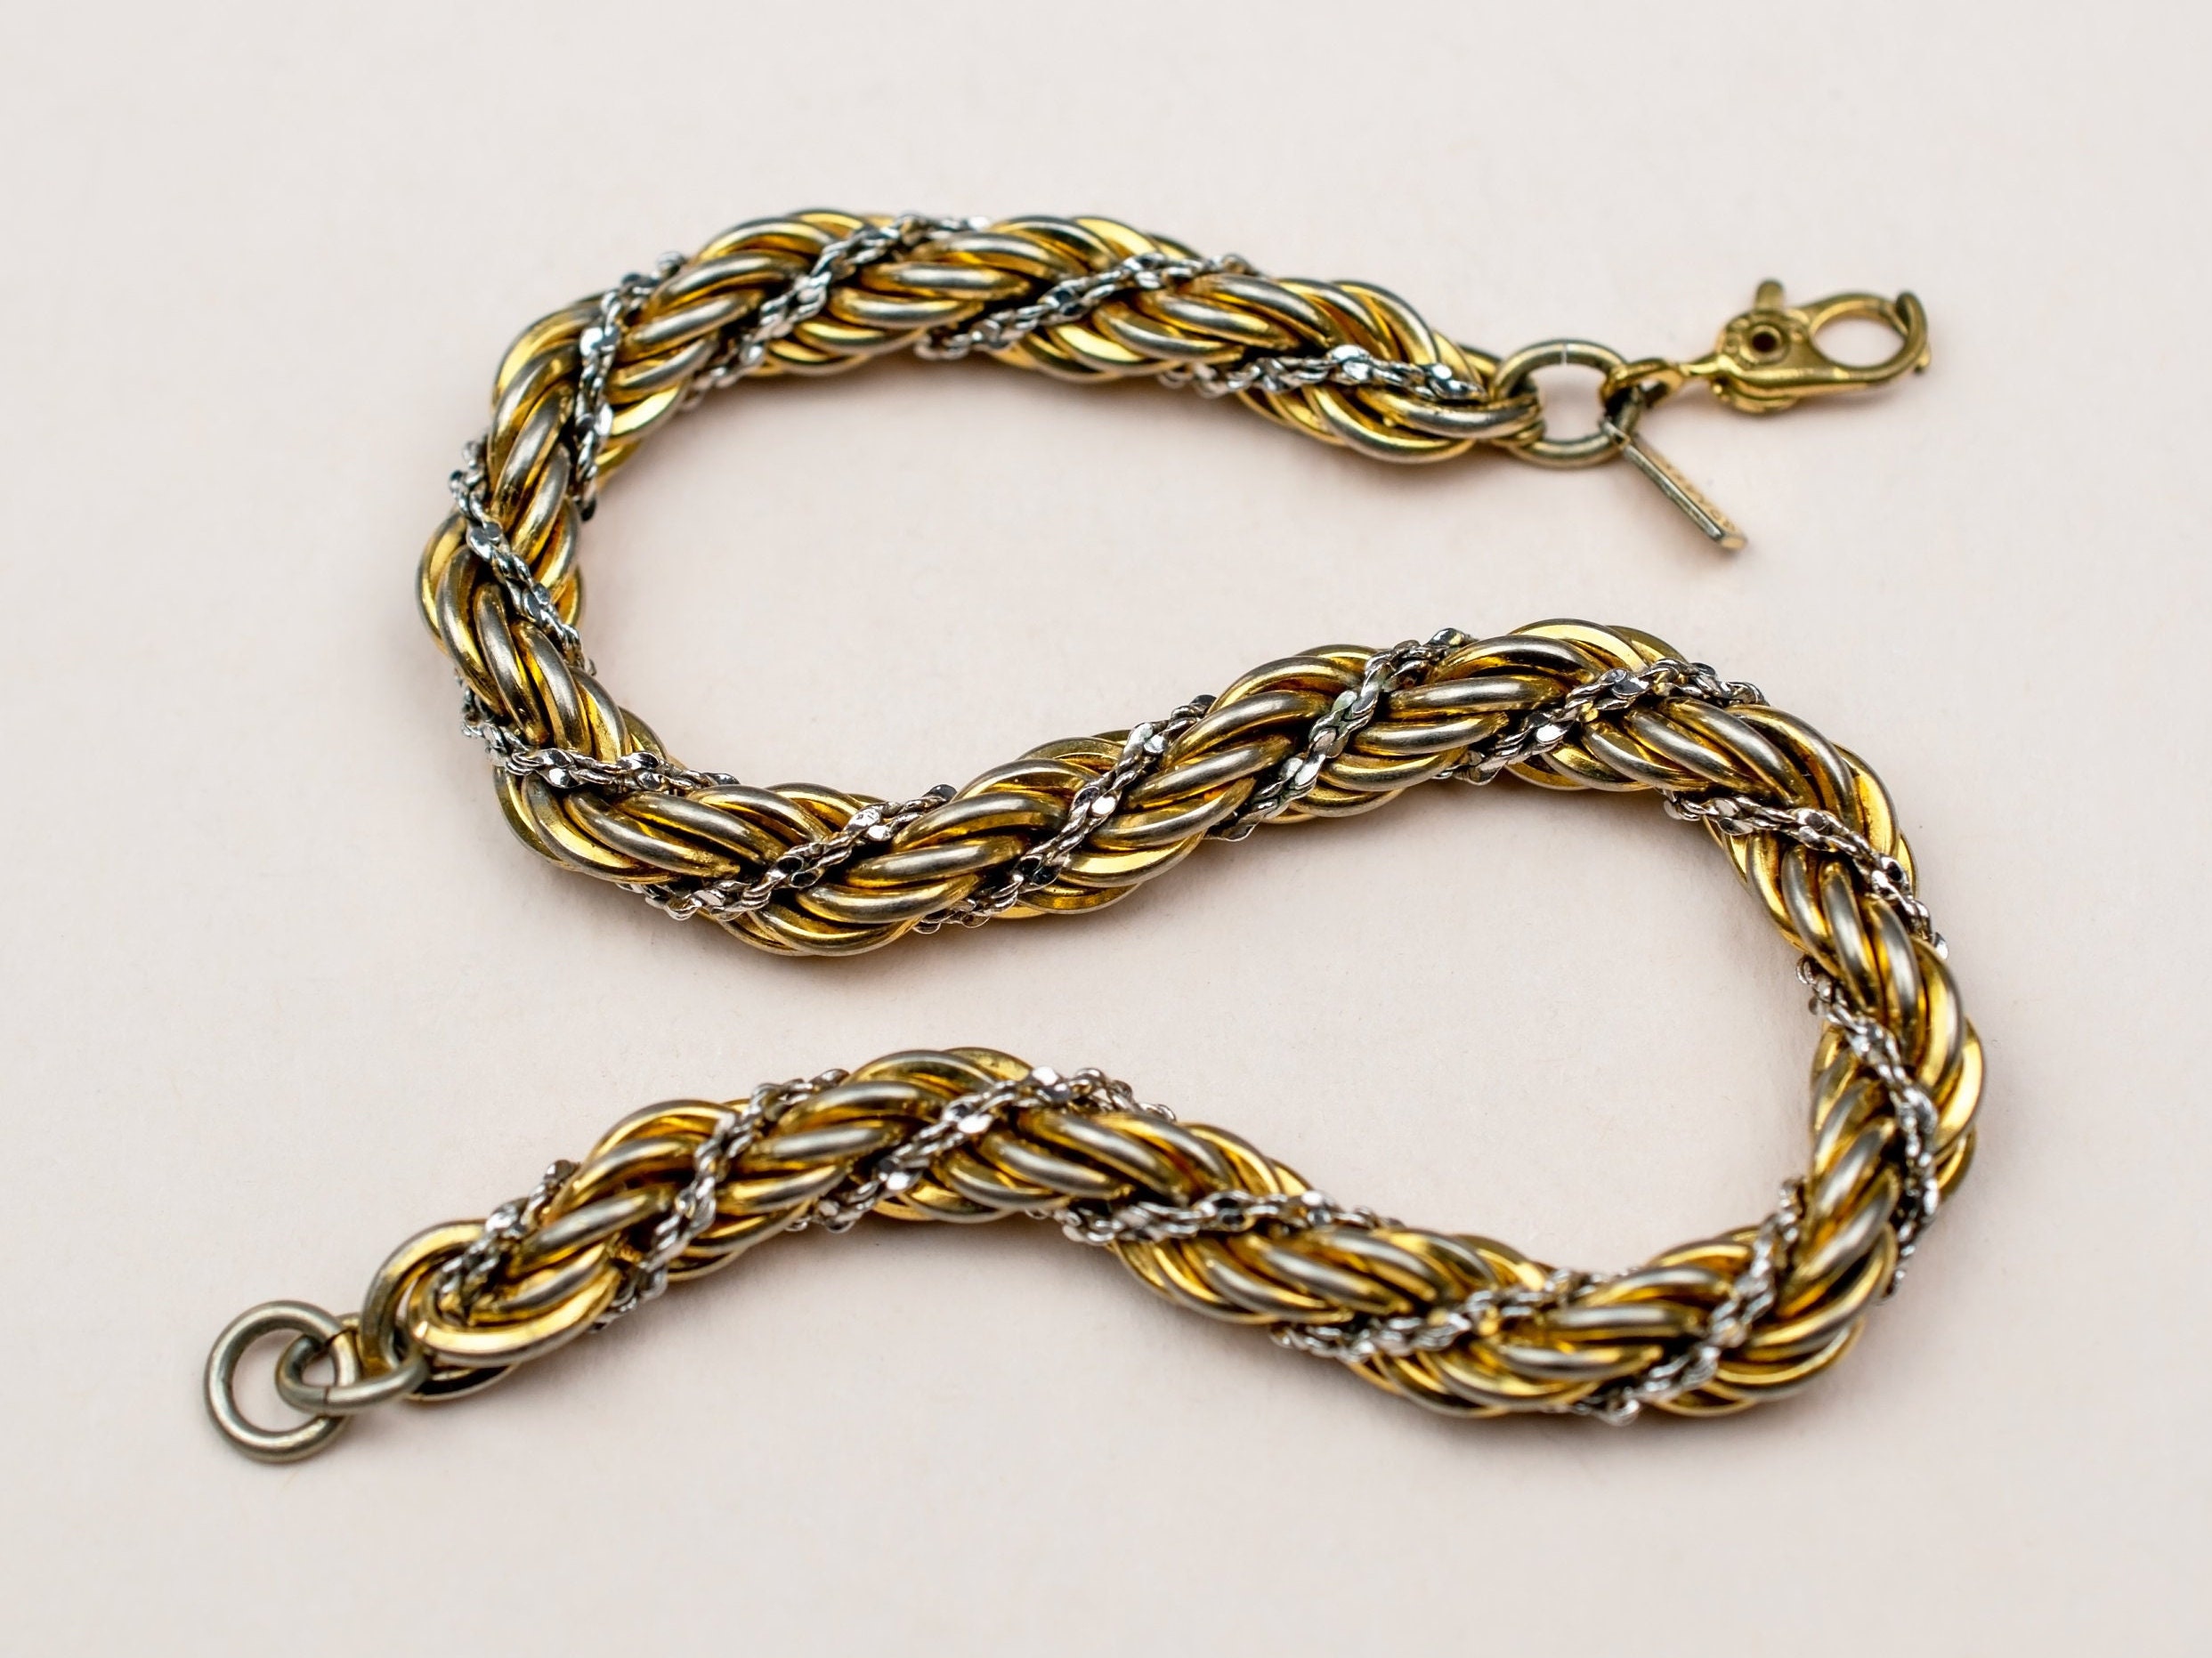 21 Inch 14K Yellow Gold Rope Chain 2.1 MM Width Pre-owned, Braswell & Son, Little Rock